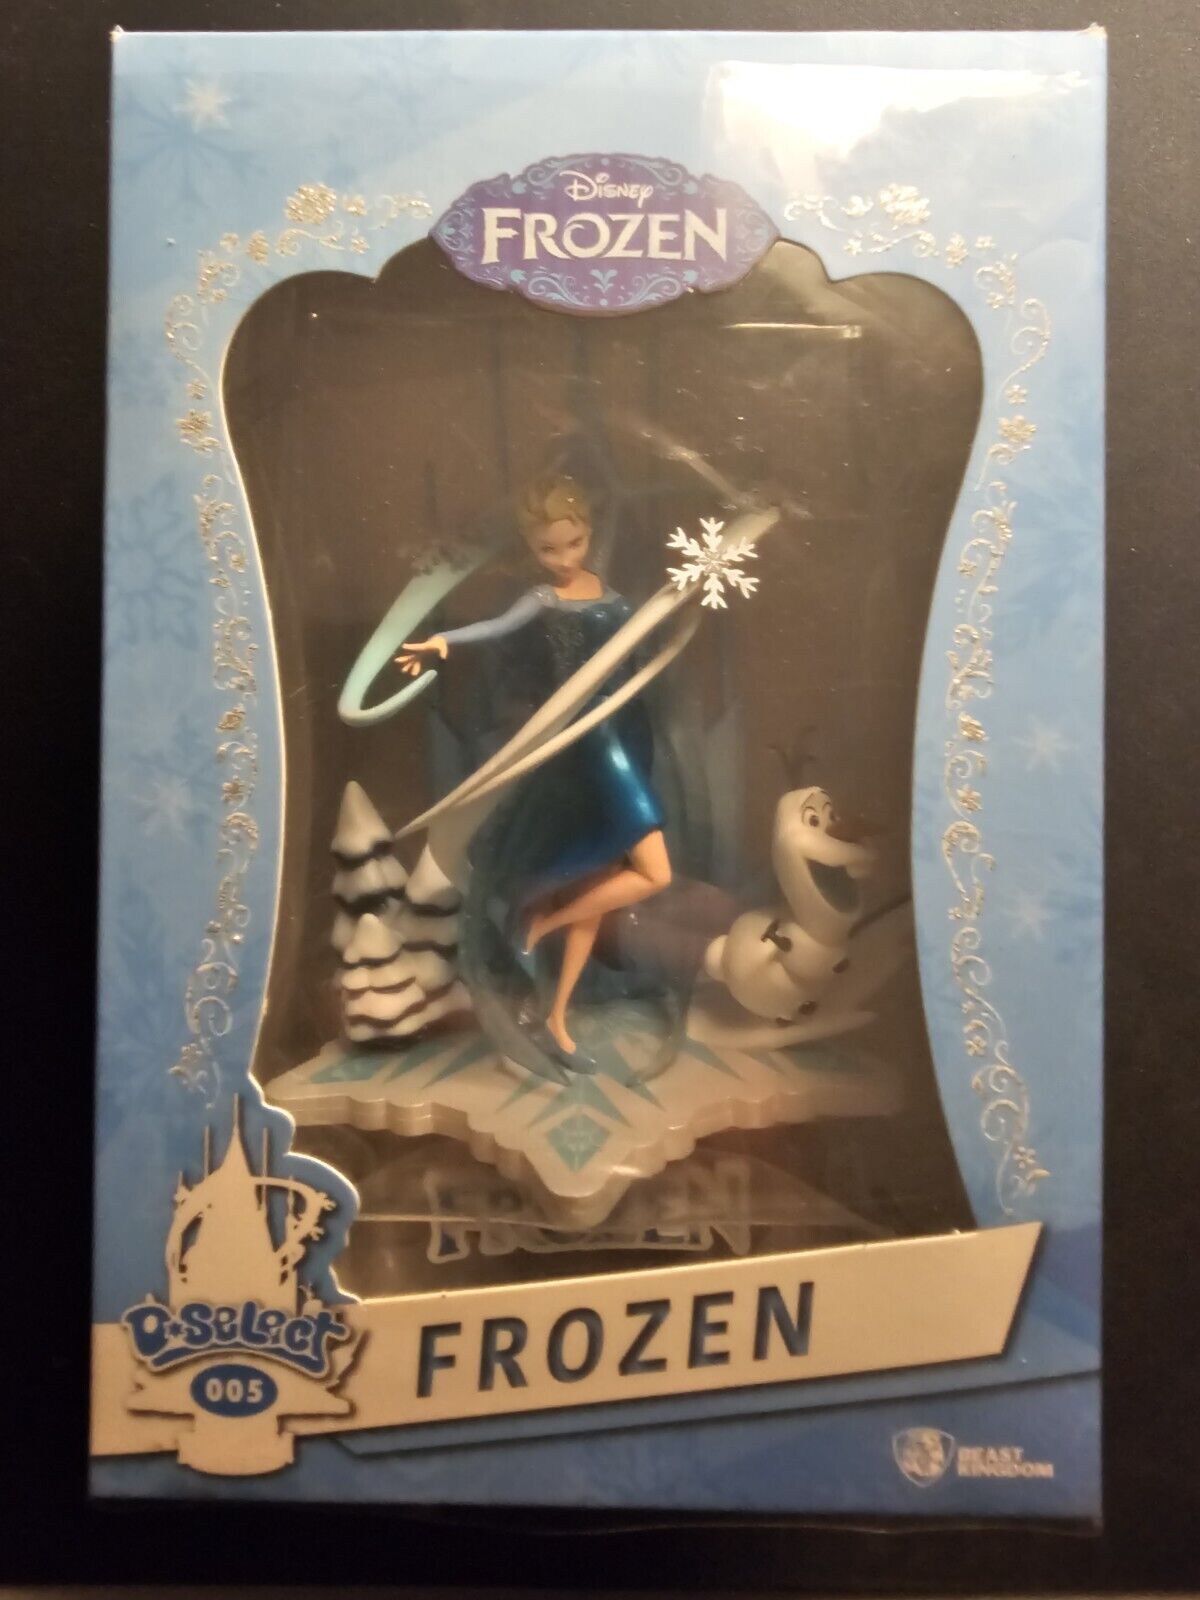 Disney Frozen D-Select Elsa and Olaf Statue DS-005 BEAST KINGDOM Opened